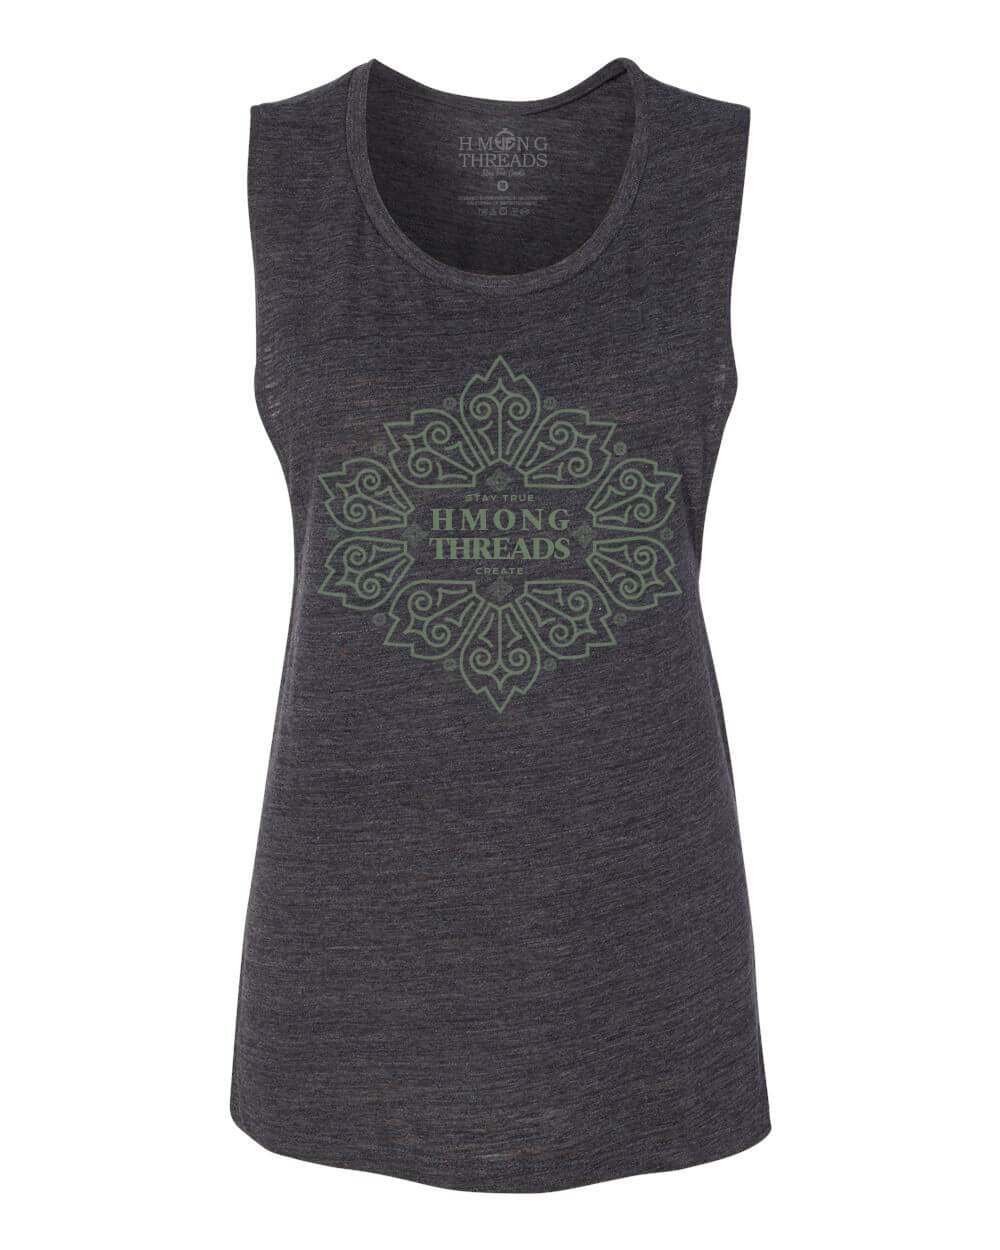 Stay True Nature Women's Scoop Muscle Tank - Charcoal Slub - HMONG THREADS